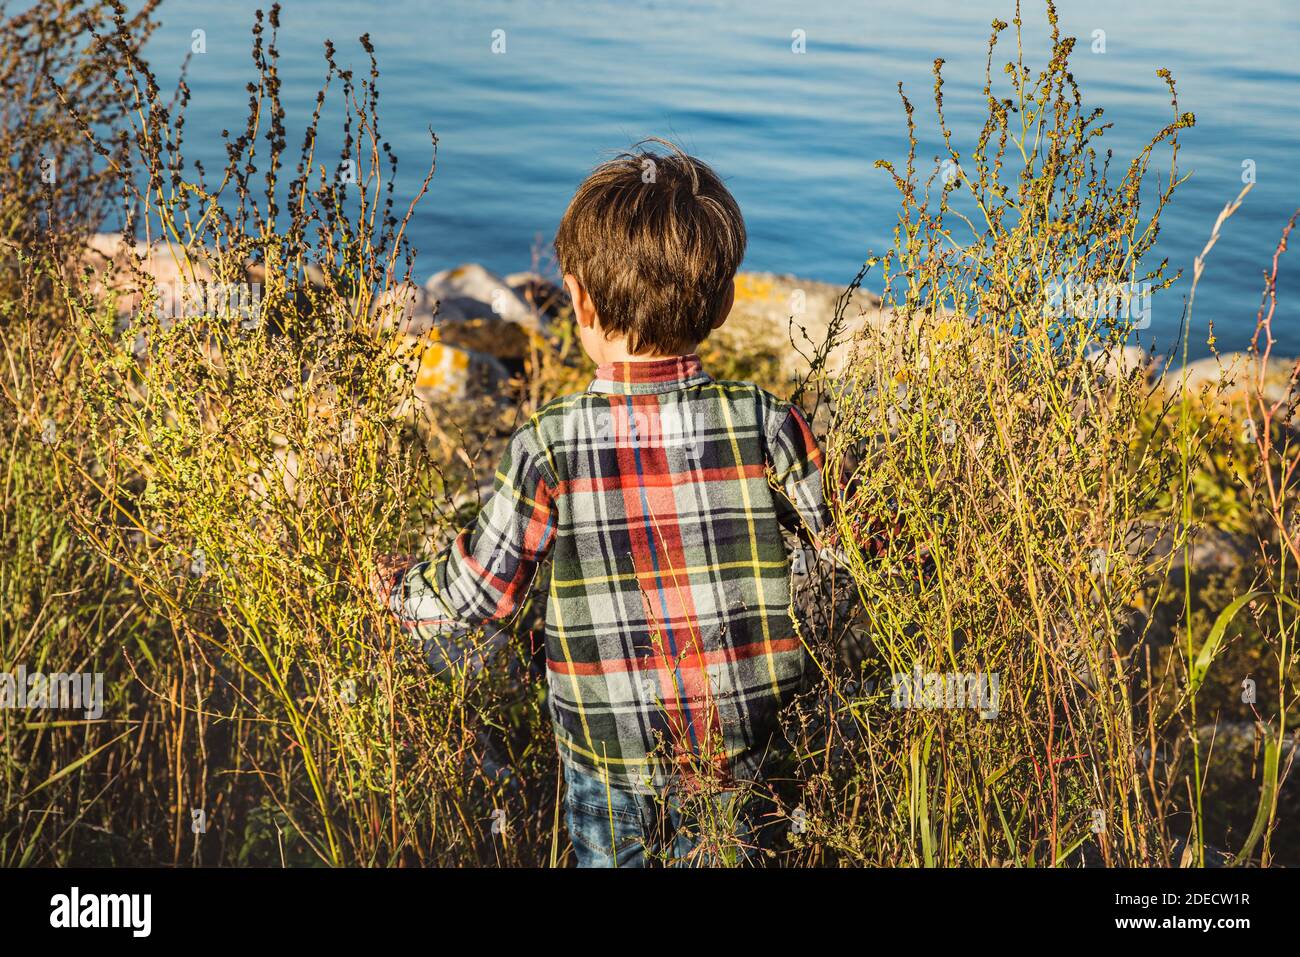 A child plays outdoor by the seaside discovering the beauty of nature gaining eagerness, learning what the nature is like and feeding his interest Stock Photo